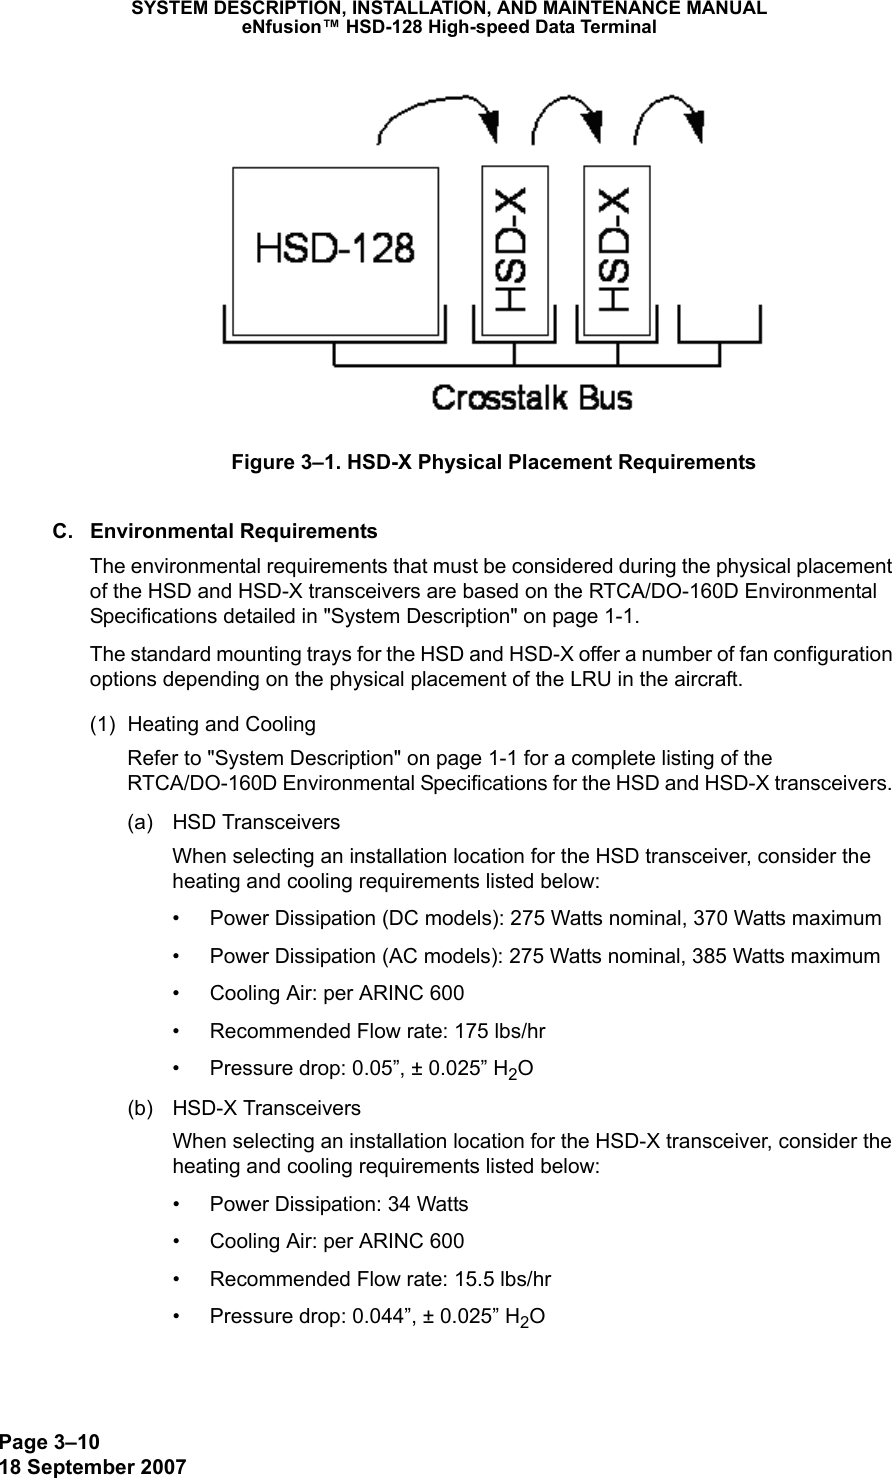 Page 3–1018 September 2007SYSTEM DESCRIPTION, INSTALLATION, AND MAINTENANCE MANUALeNfusion™ HSD-128 High-speed Data TerminalFigure 3–1. HSD-X Physical Placement RequirementsC. Environmental RequirementsThe environmental requirements that must be considered during the physical placement of the HSD and HSD-X transceivers are based on the RTCA/DO-160D Environmental Specifications detailed in &quot;System Description&quot; on page 1-1.The standard mounting trays for the HSD and HSD-X offer a number of fan configuration options depending on the physical placement of the LRU in the aircraft. (1) Heating and CoolingRefer to &quot;System Description&quot; on page 1-1 for a complete listing of the RTCA/DO-160D Environmental Specifications for the HSD and HSD-X transceivers. (a) HSD TransceiversWhen selecting an installation location for the HSD transceiver, consider the heating and cooling requirements listed below:• Power Dissipation (DC models): 275 Watts nominal, 370 Watts maximum• Power Dissipation (AC models): 275 Watts nominal, 385 Watts maximum• Cooling Air: per ARINC 600• Recommended Flow rate: 175 lbs/hr• Pressure drop: 0.05”, ± 0.025” H2O(b) HSD-X TransceiversWhen selecting an installation location for the HSD-X transceiver, consider the heating and cooling requirements listed below:• Power Dissipation: 34 Watts• Cooling Air: per ARINC 600• Recommended Flow rate: 15.5 lbs/hr• Pressure drop: 0.044”, ± 0.025” H2O